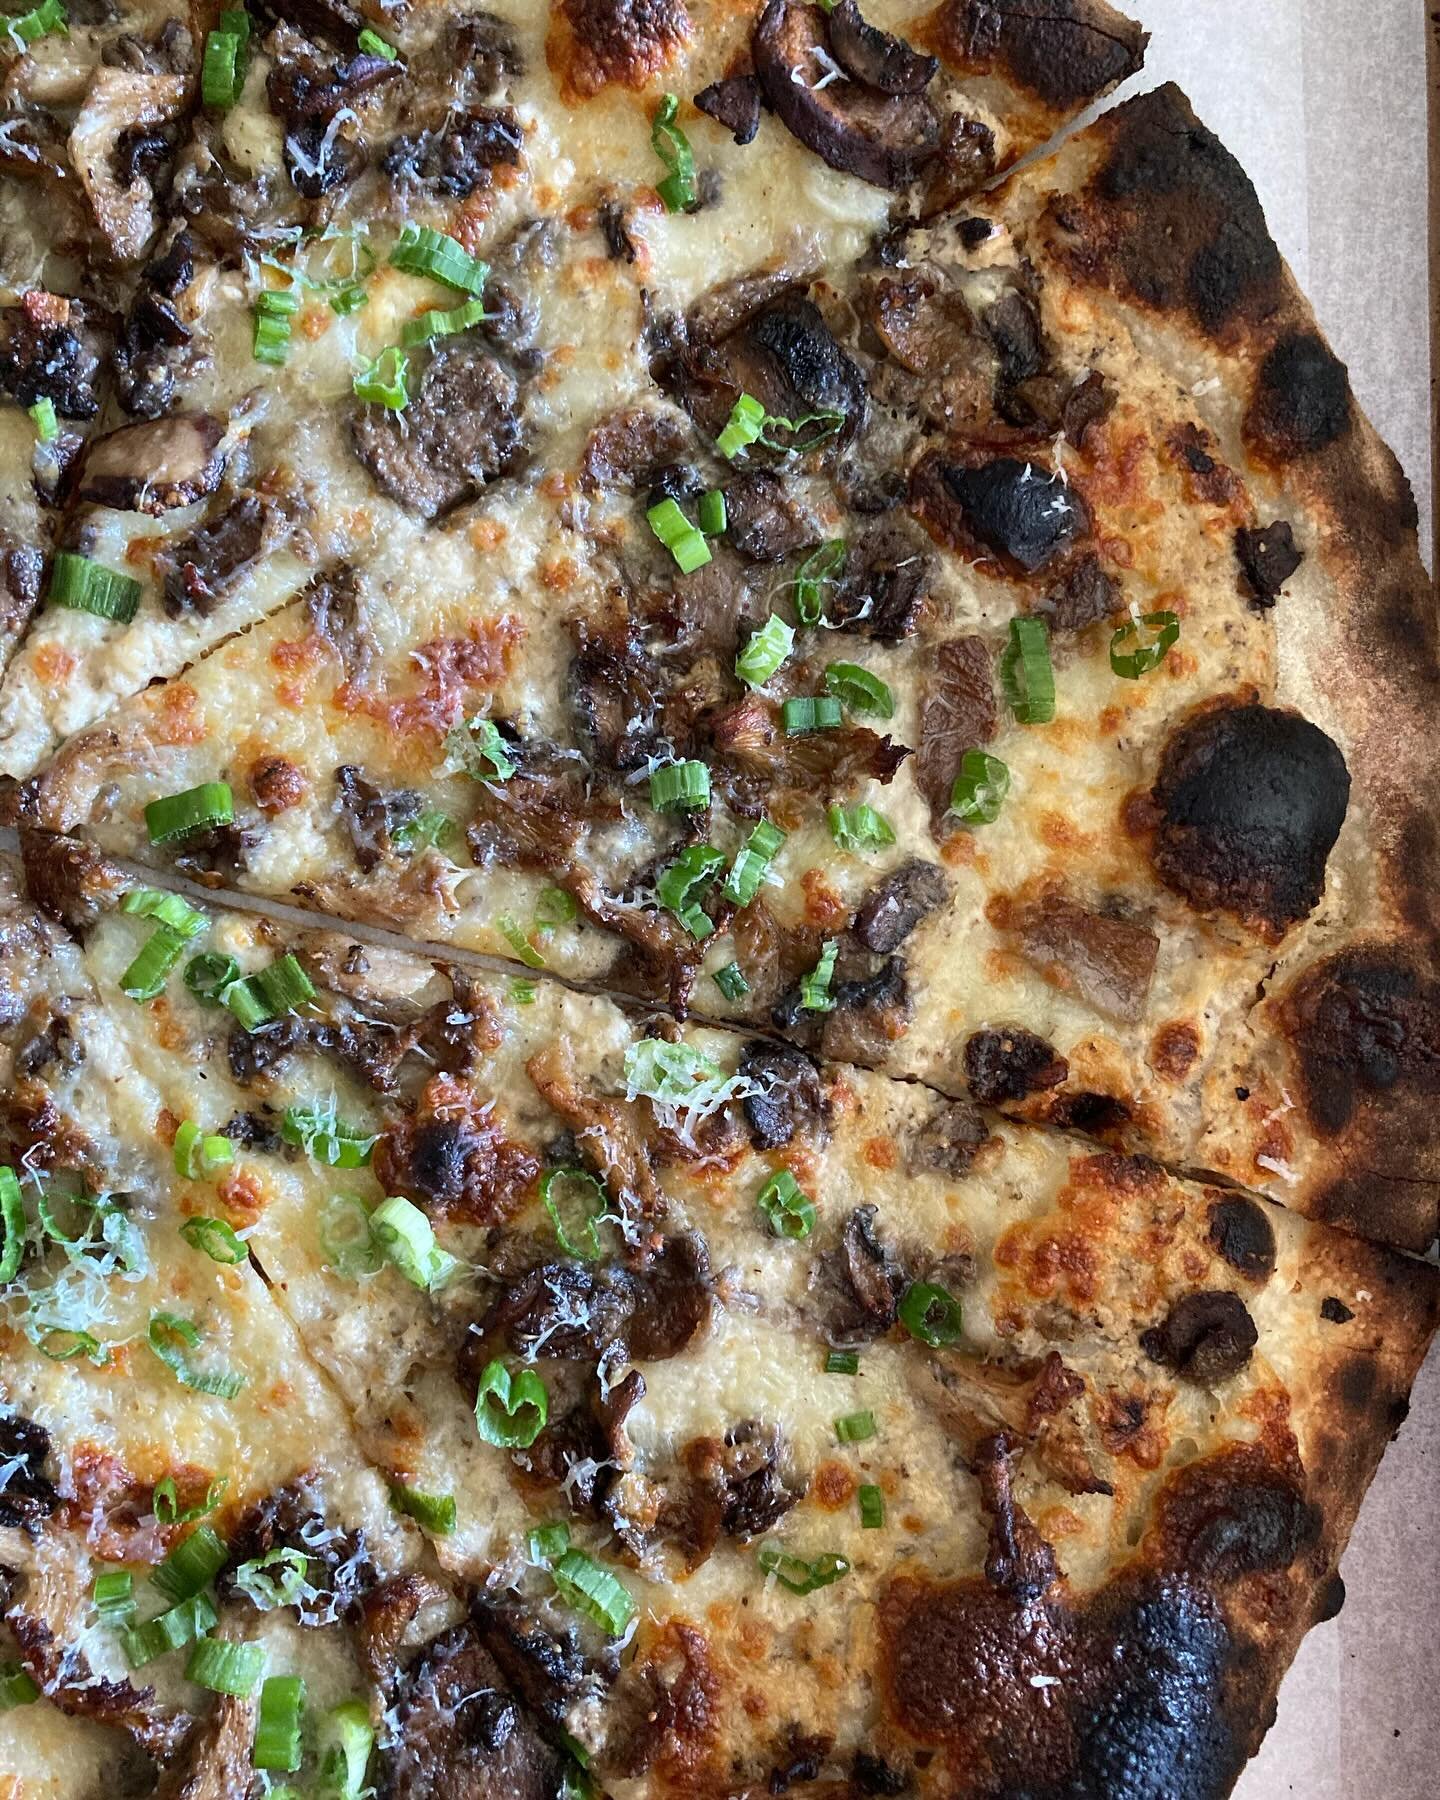 We&rsquo;re back! Open today through Sunday 4-8PM and serving up a weekly special: Mushroom &amp; Scallion pie! Cream base, cheese, mushrooms, scallions, and pecorino.